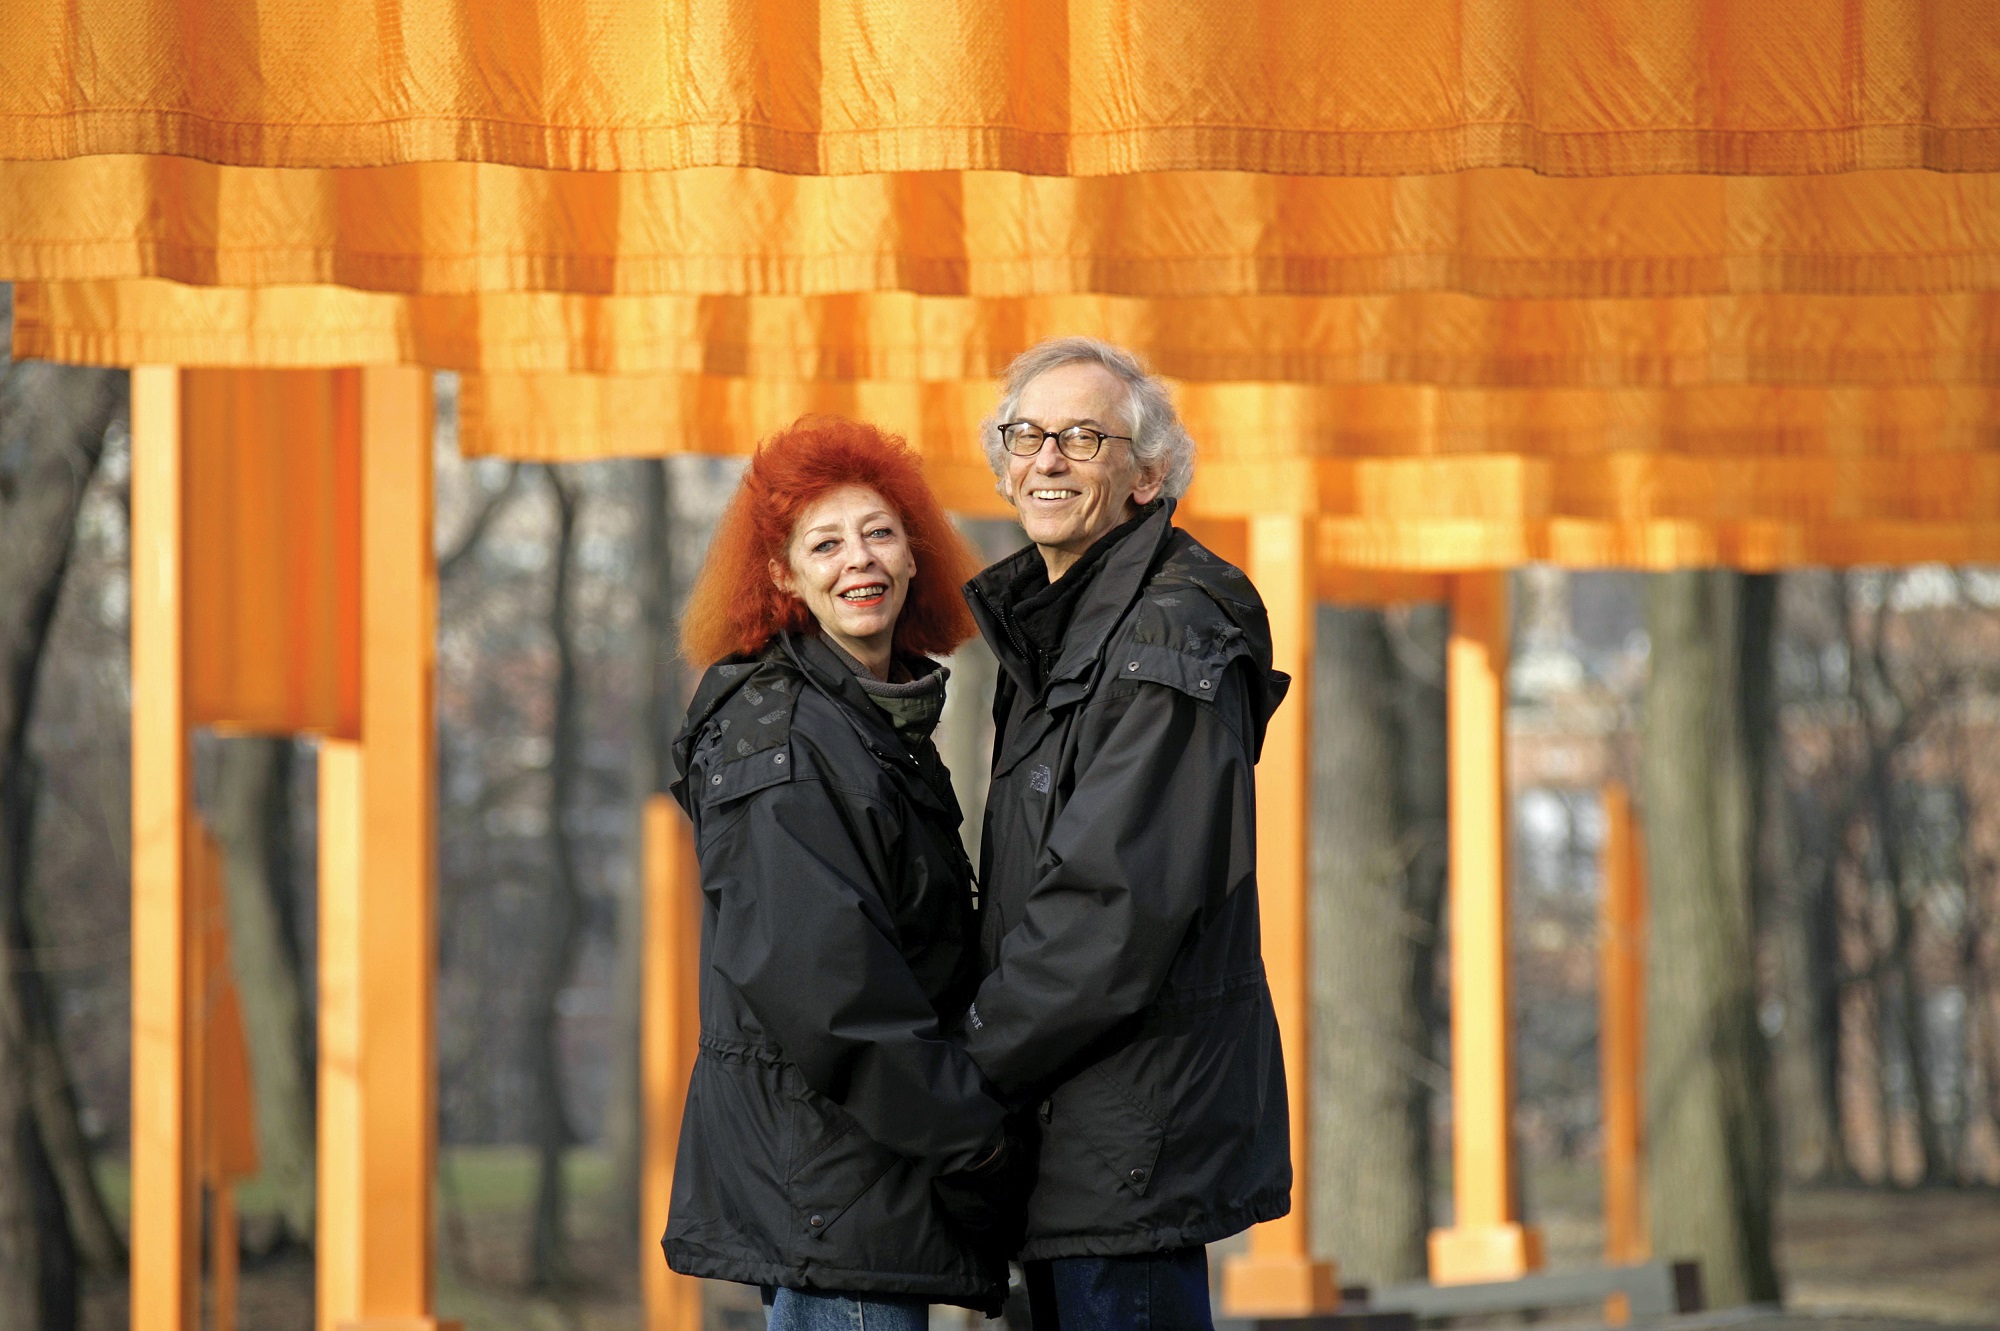  Christo and Jeanne-Claude at The Gates, February 2005 Photo: Wolfgang Volz 